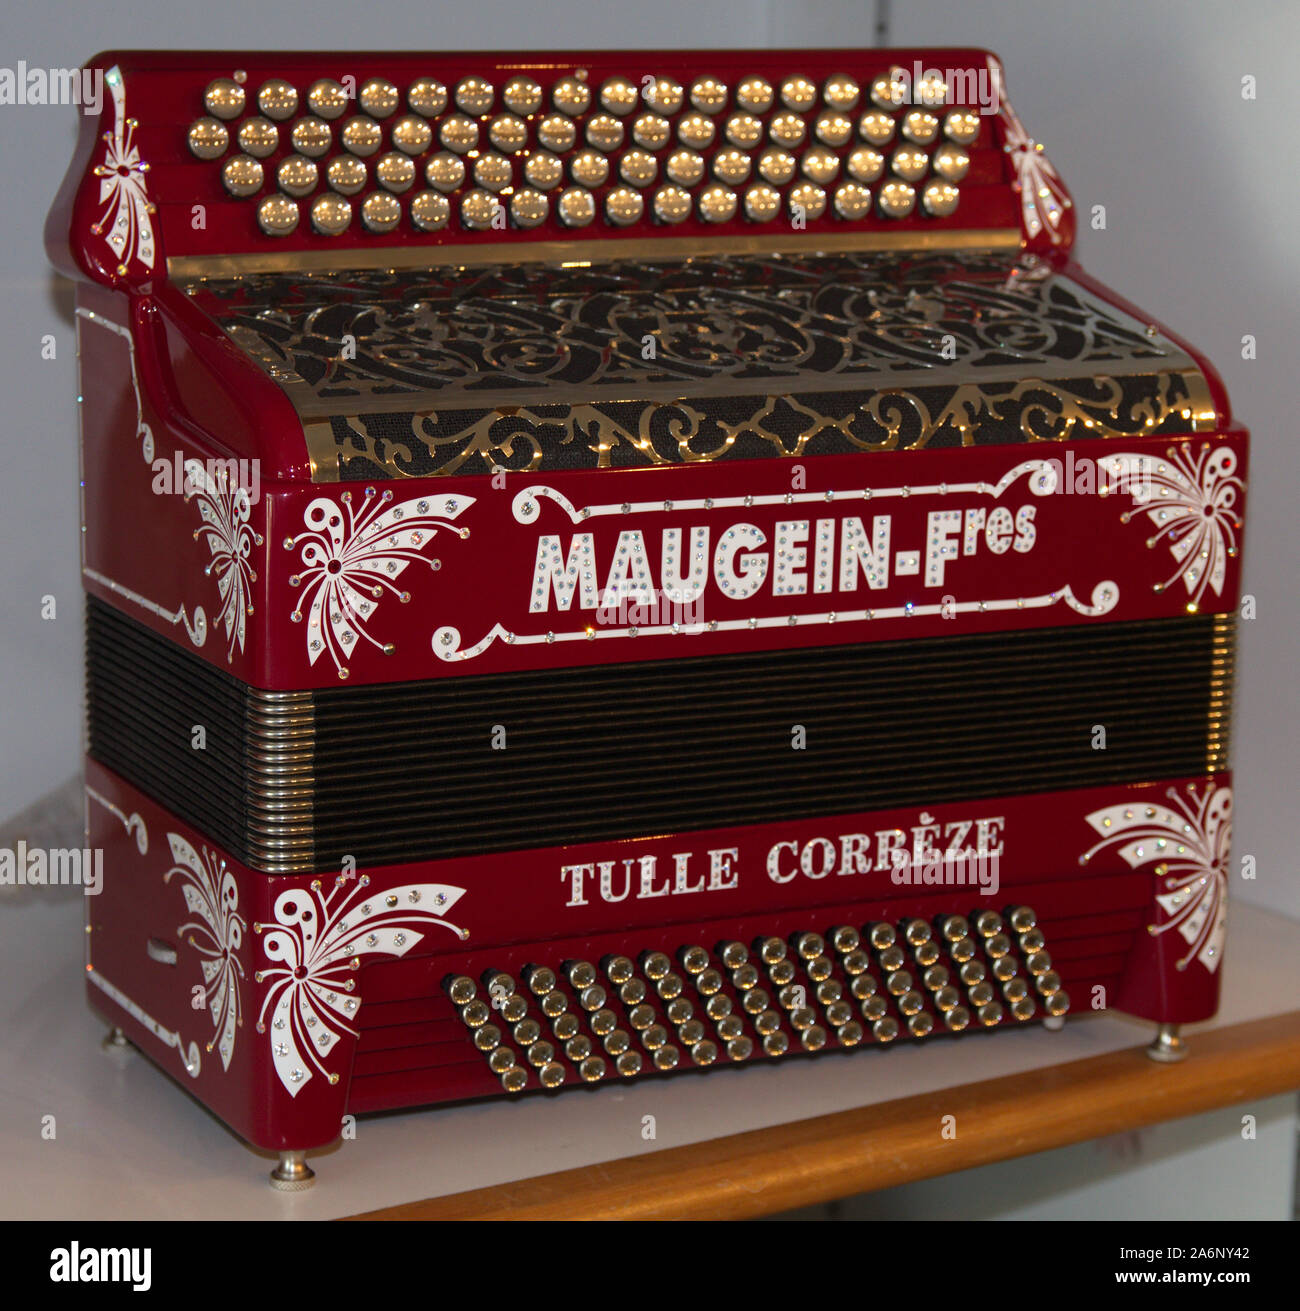 Accordion made by Maugein company in Tulle, Correze, France Stock Photo -  Alamy